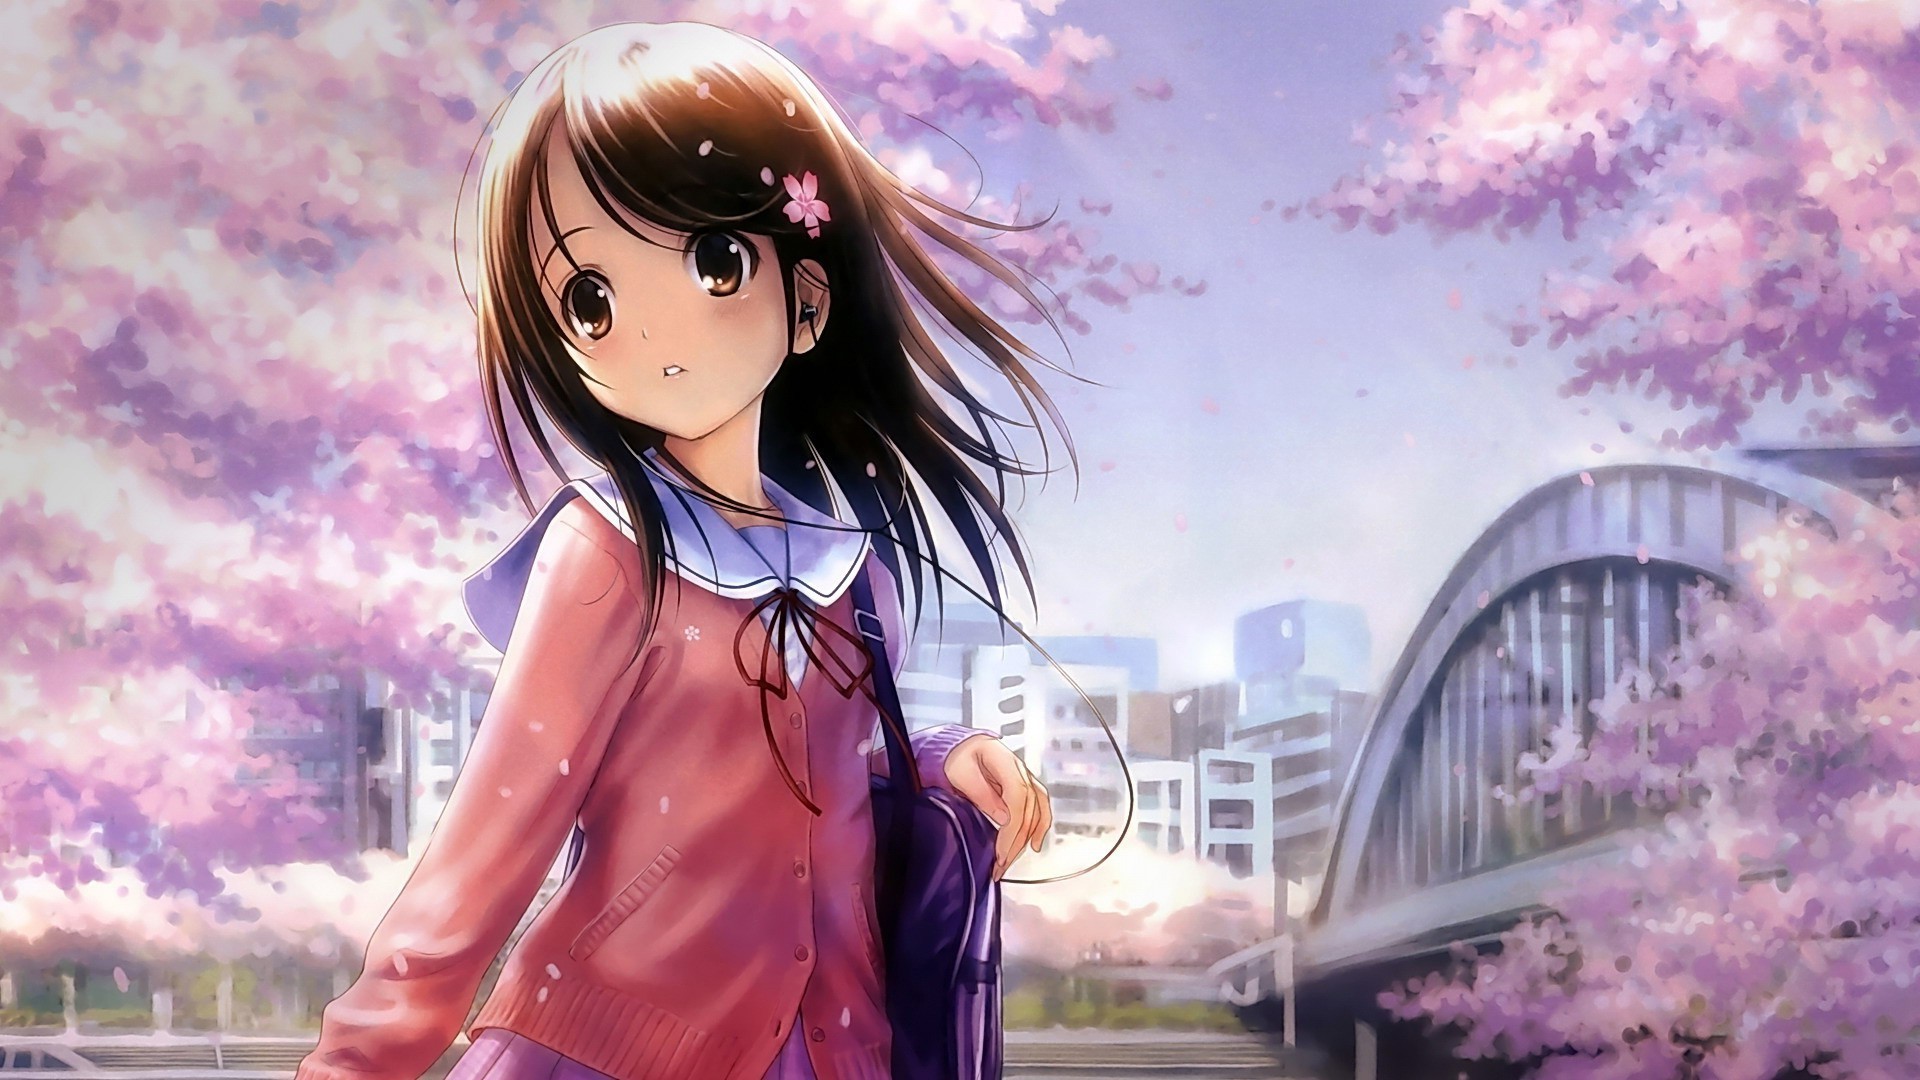 Wallpaper Anime Cute 77 Pictures